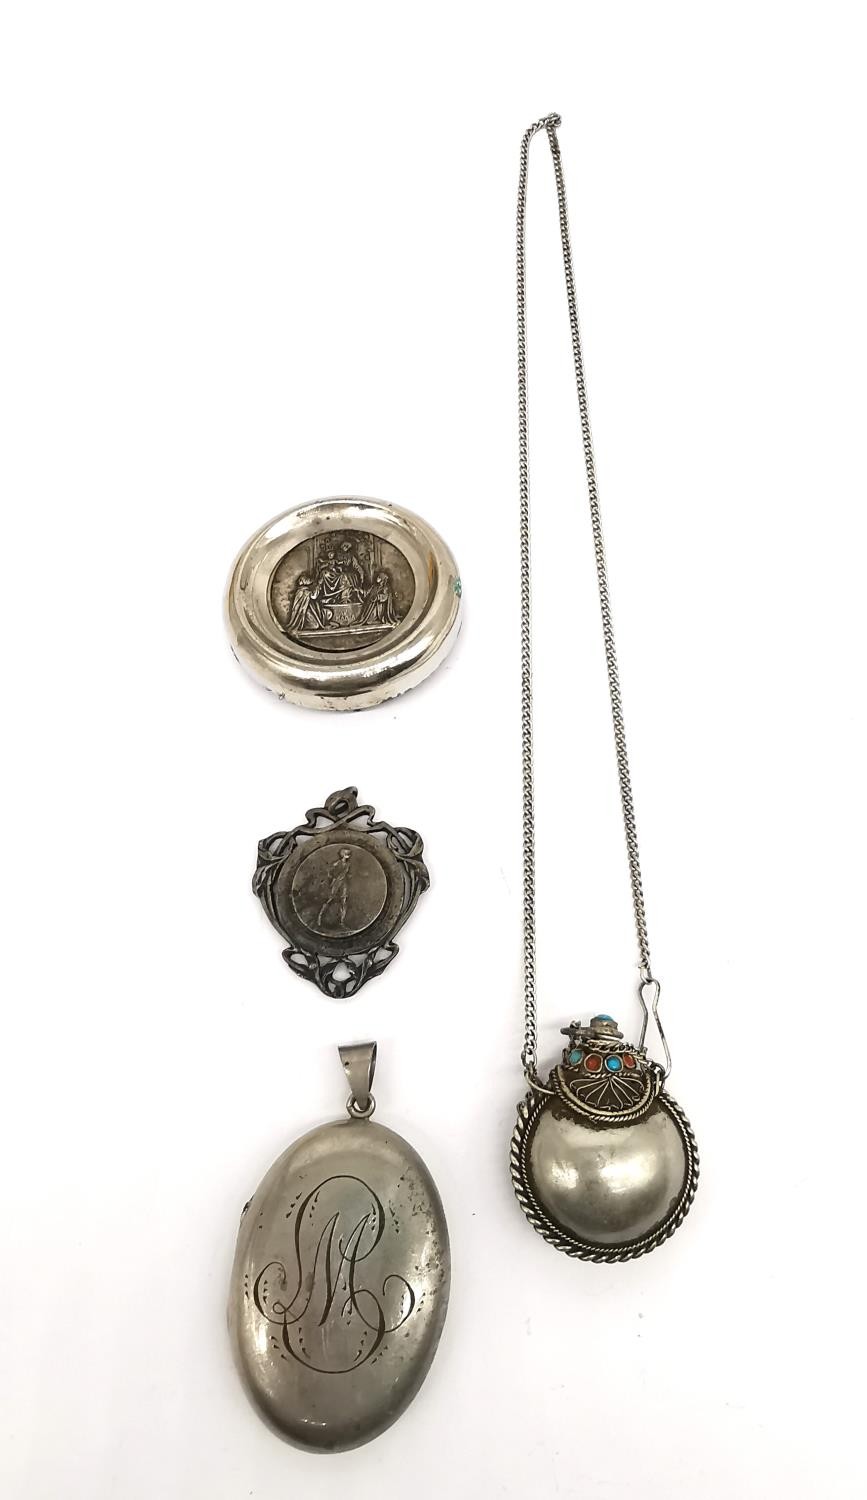 A white metal perfume flask with coral and turquoise detailing on chain, a locket containing plaited